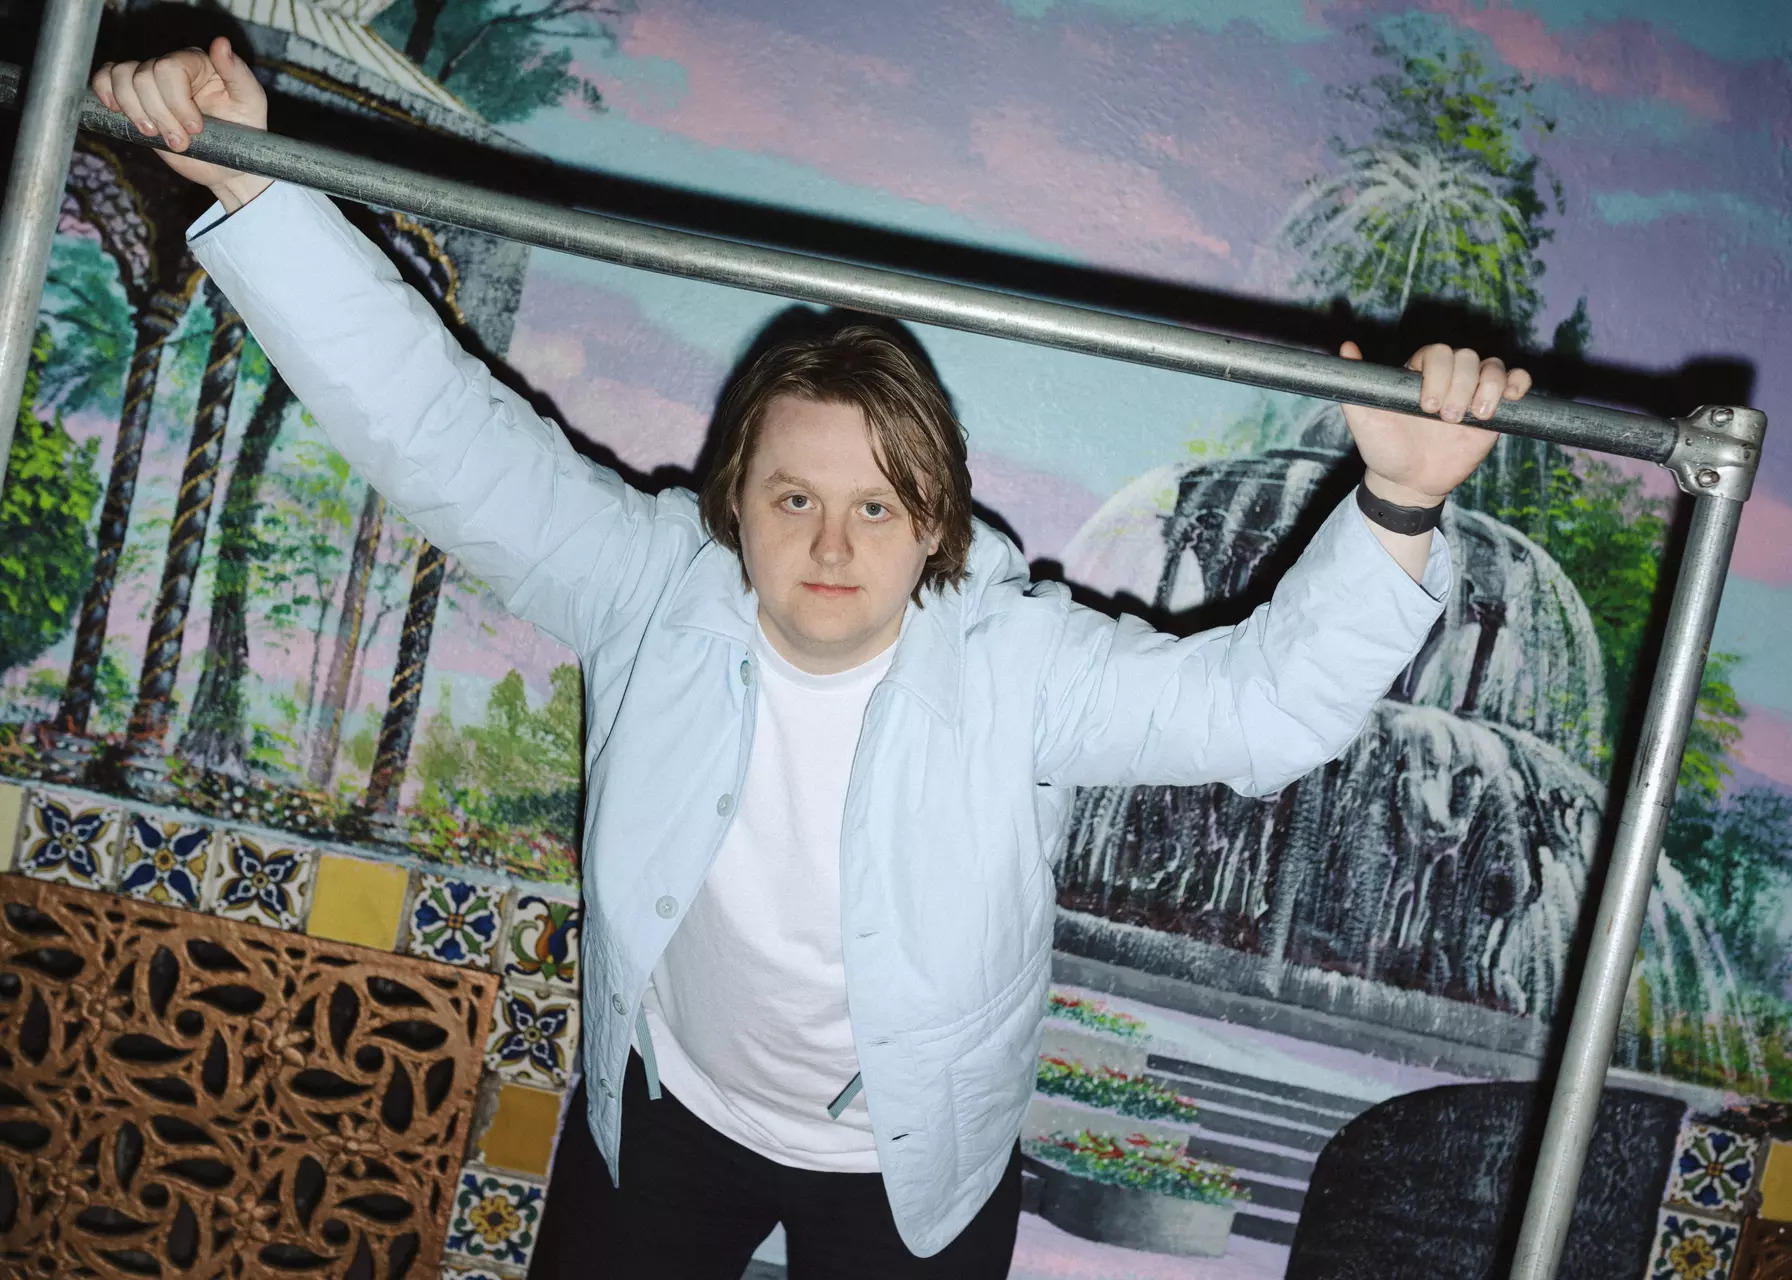 Lewis Capaldi’s shows cancellation: All you may want to know